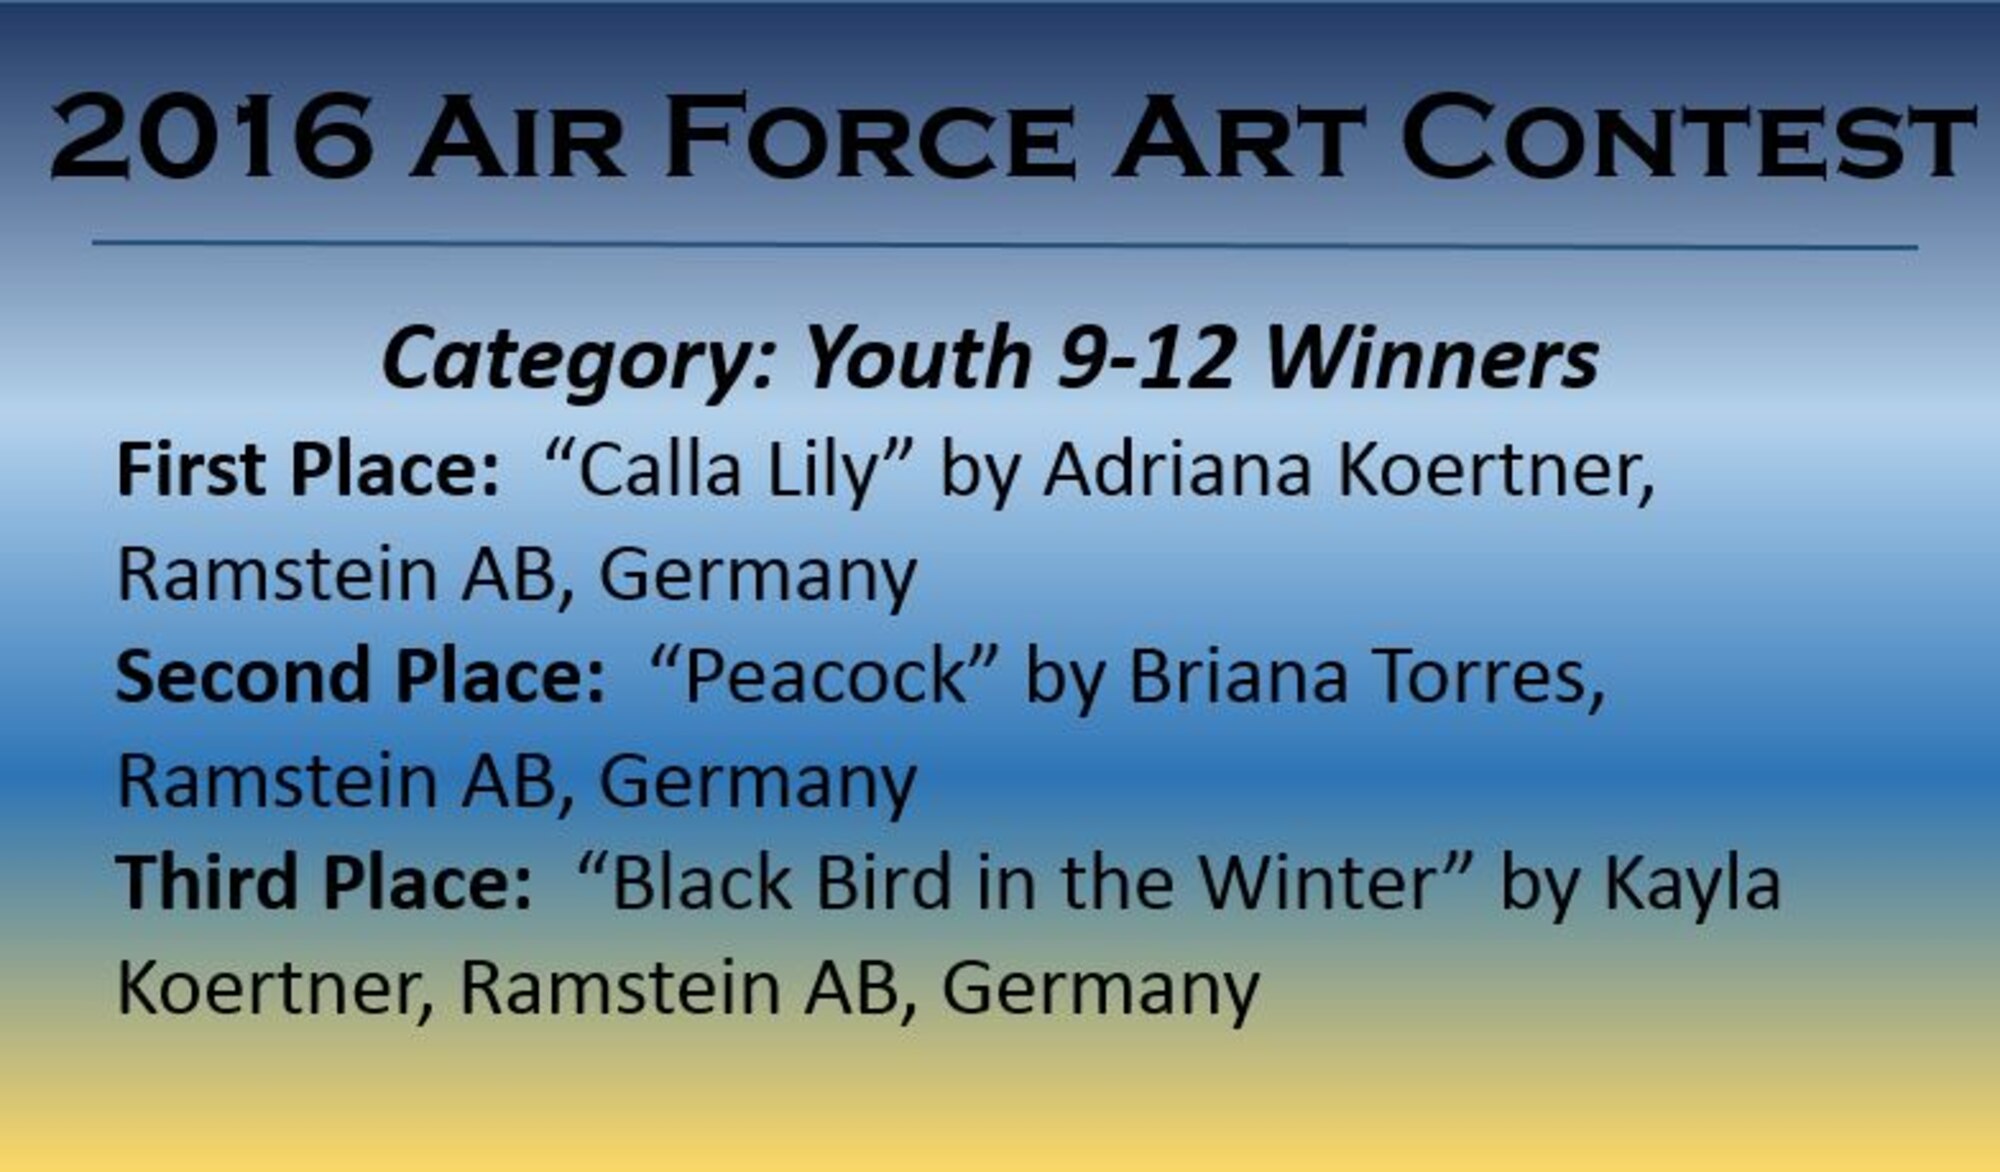 Congratulations to the 2016 Air Force Art Contest Youth 9-12 Winners.